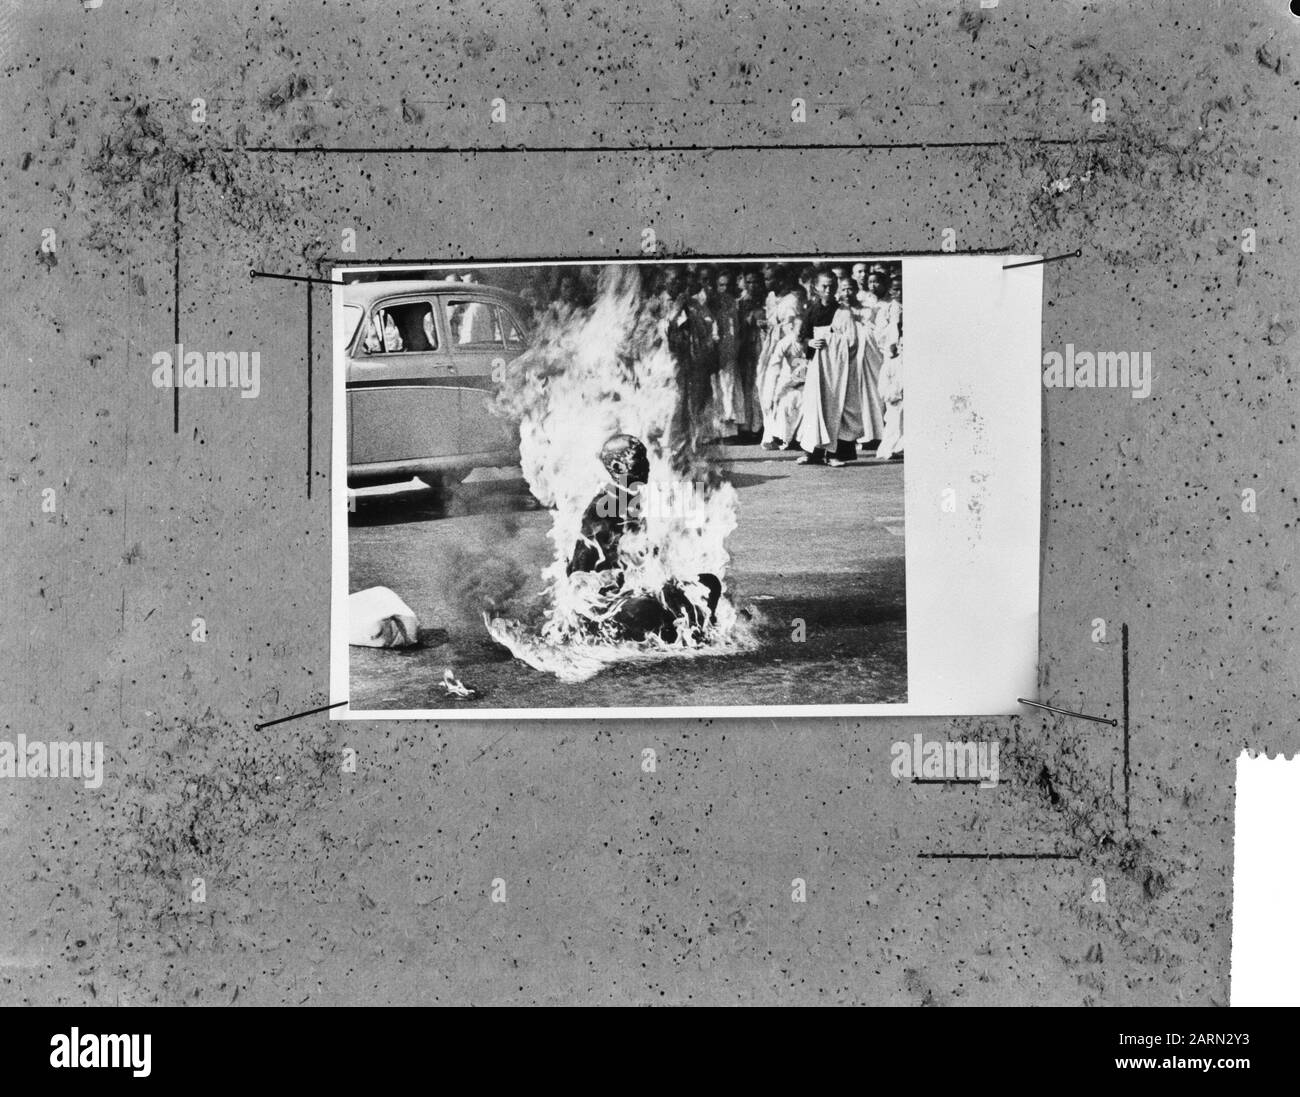 Vietnam, Saigon, June 11, 1963 The Buddhist monk Thich Quang Duc commits suicide by setting himself on fire. The photo was named World Press Photo of 1963 (the main prize and first prize in the catgeorie news) during the opening of the exhibition at the Gemeentemuseum in The Hague. The photo bears the title Fiery Suicide and was taken by Malcolm Browne from Saigon Date: 13 December 1963 Location: Saigon, Vietnam Keywords: photography, monks, burning, suicide Institution Name: World Press Photo Stock Photo